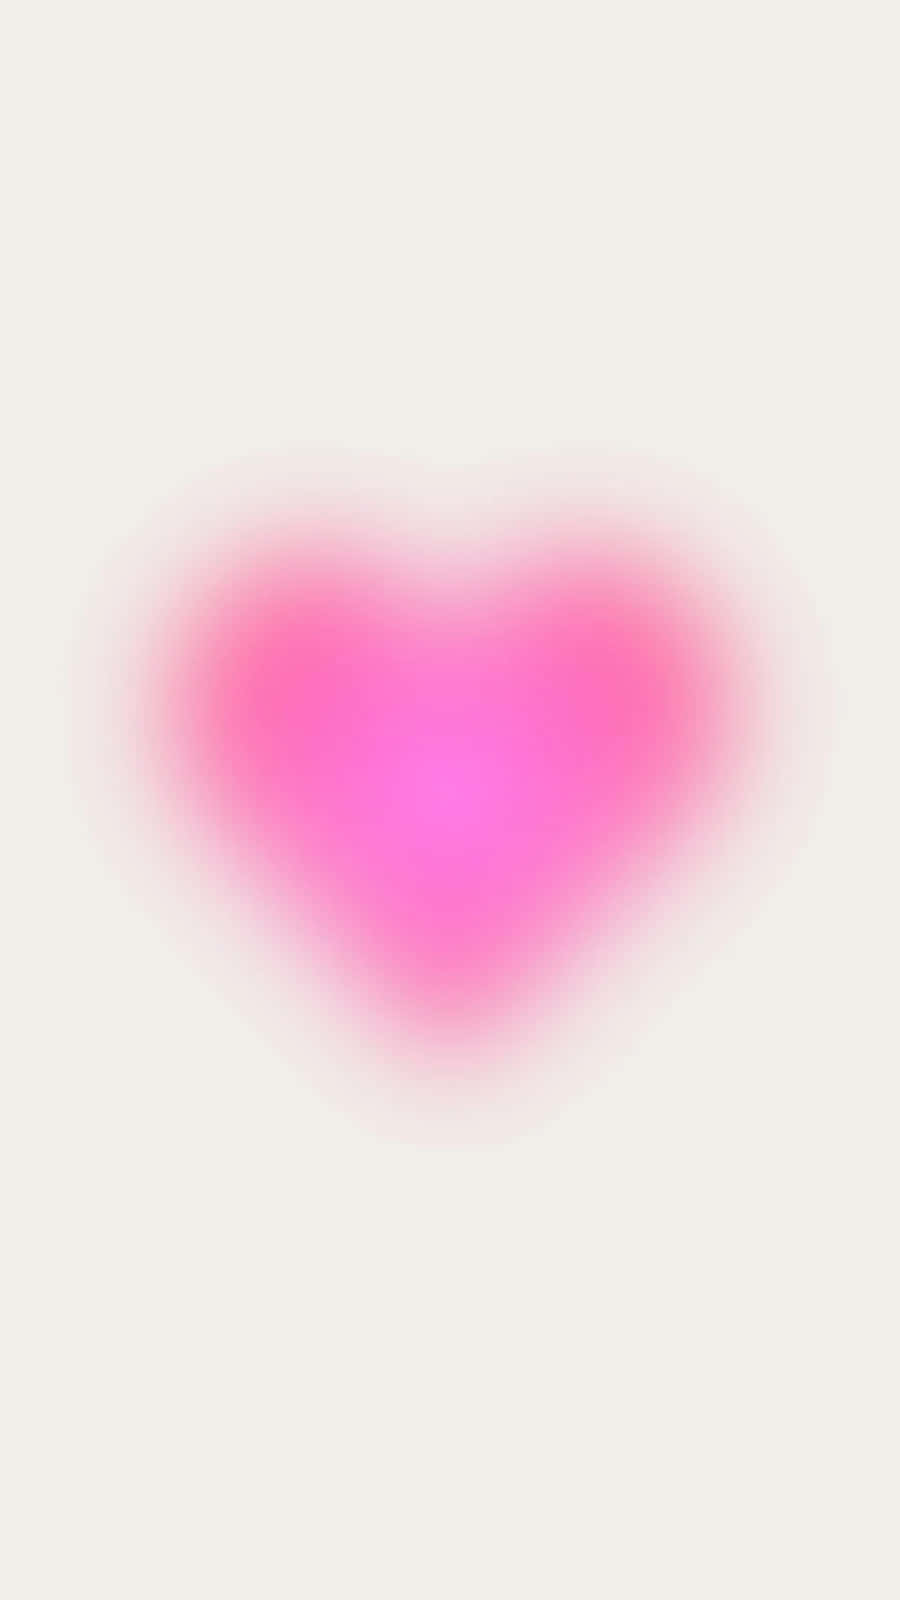 Abstract Pink Heart Glow Wallpaper